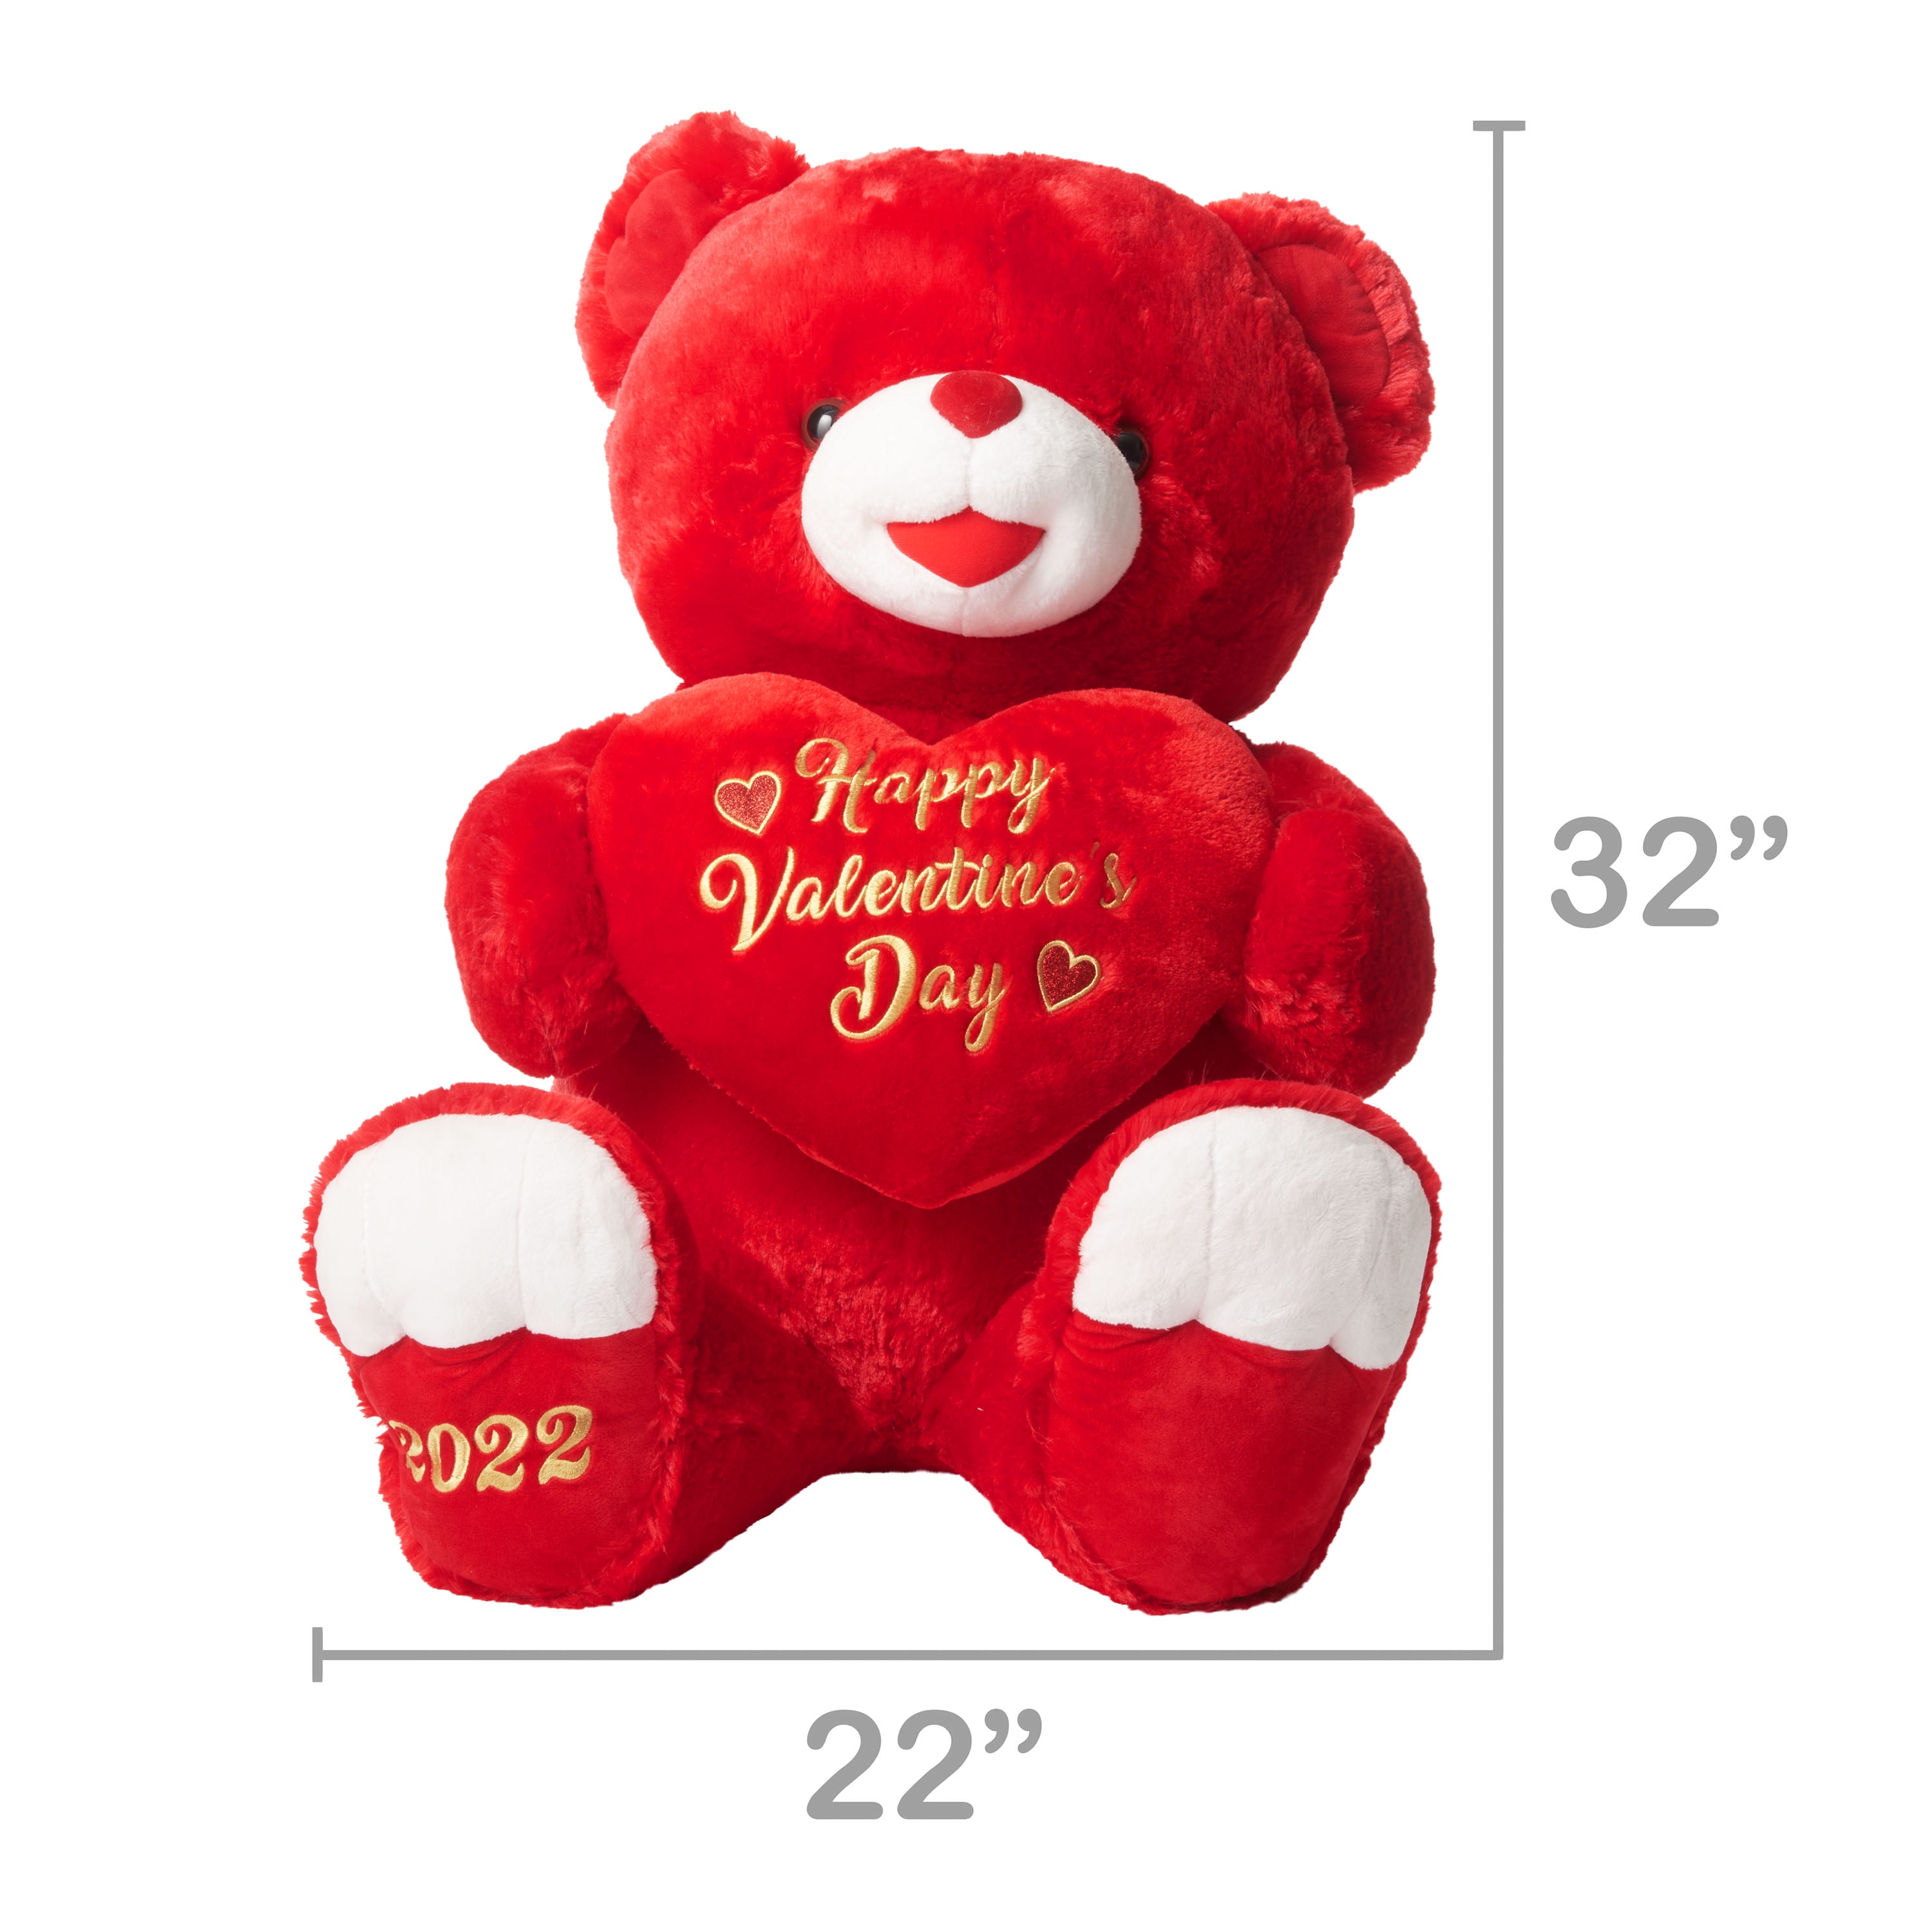 WAY TO CELEBRATE VALENTINE'S DAY Brown TEDDY BEAR DATED 2022 Ships Fast 